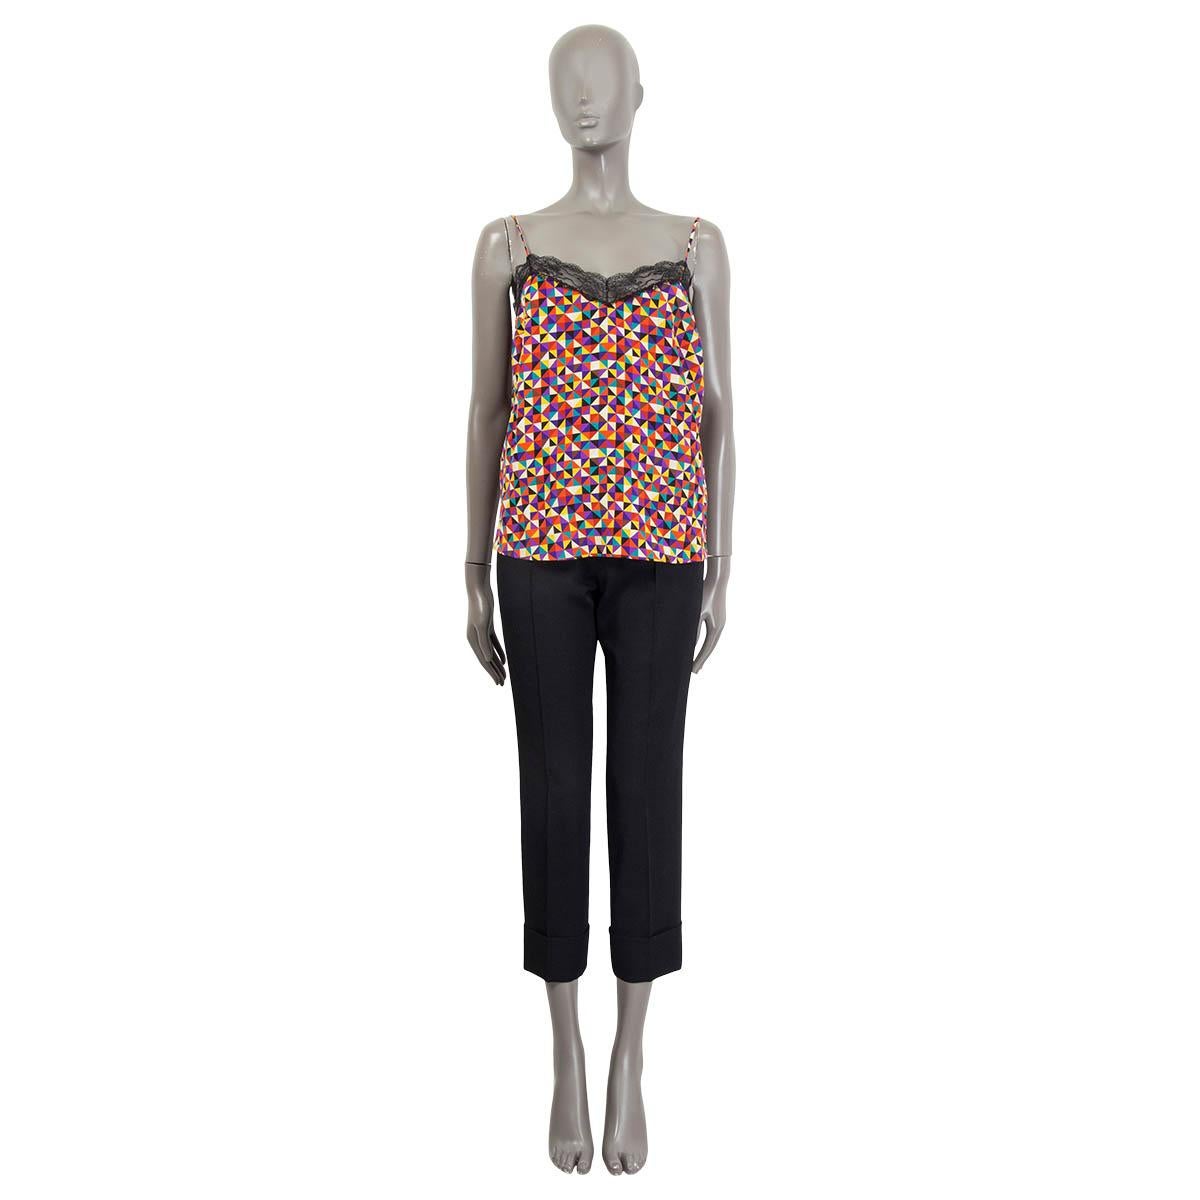 100% authentic Etro sleeveless rectangle print top in purple, green, red, yellow and black silk (100%). Features a lace hem. Unlined. Has been worn and is in excellent condition.

Measurements
Tag Size	40
Size	S
Bust To	88cm (34.3in)
Waist To	94cm